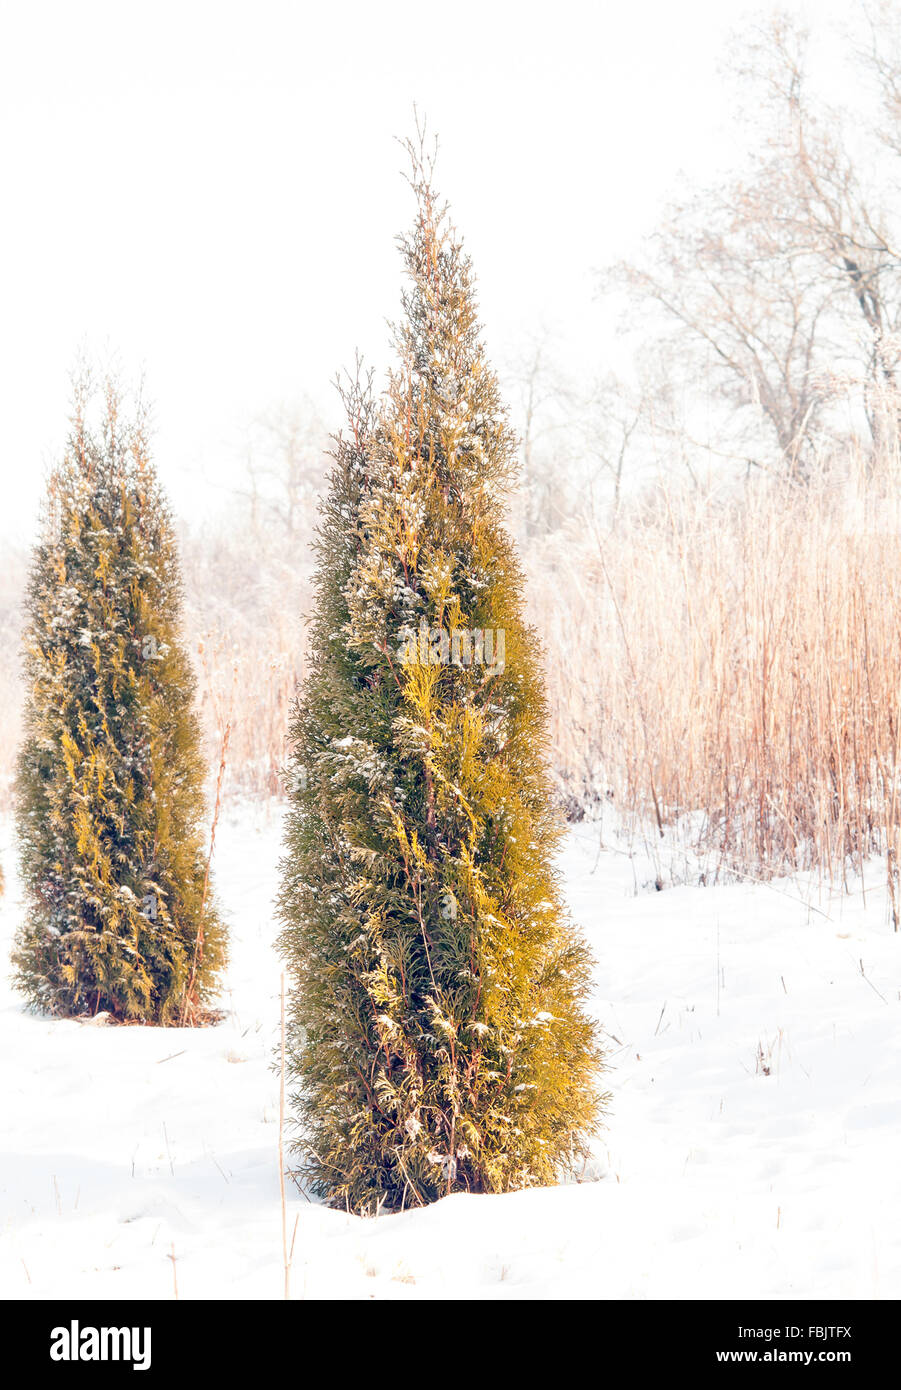 thuja covered by snow Stock Photo